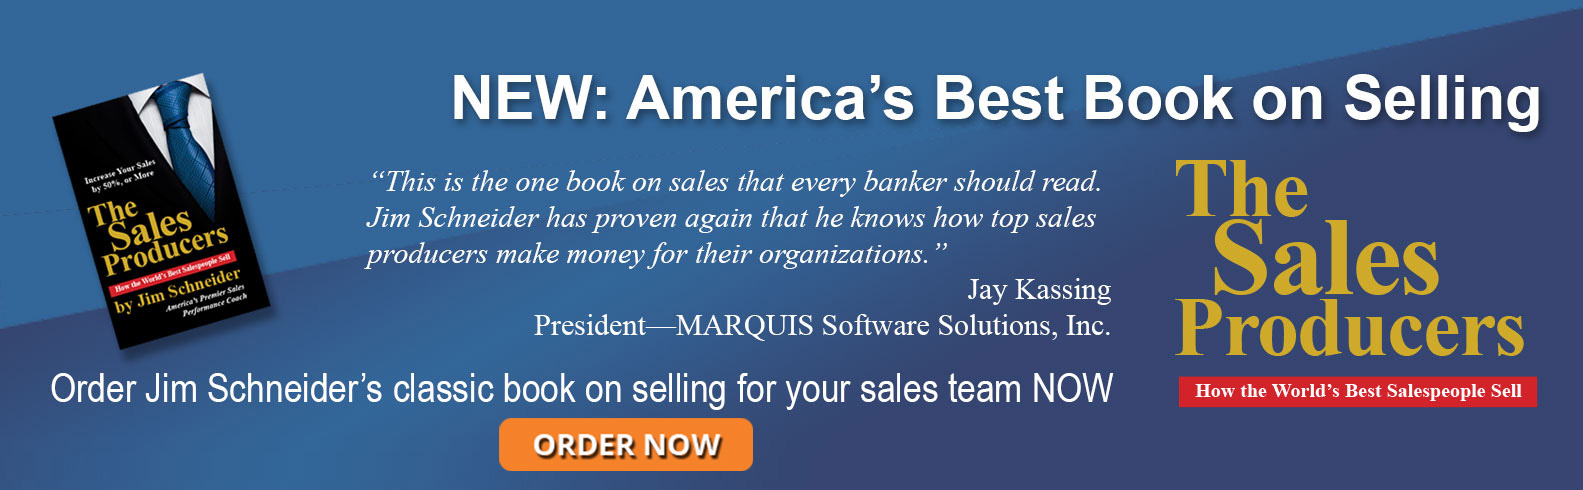 The-Sales-Producers-book